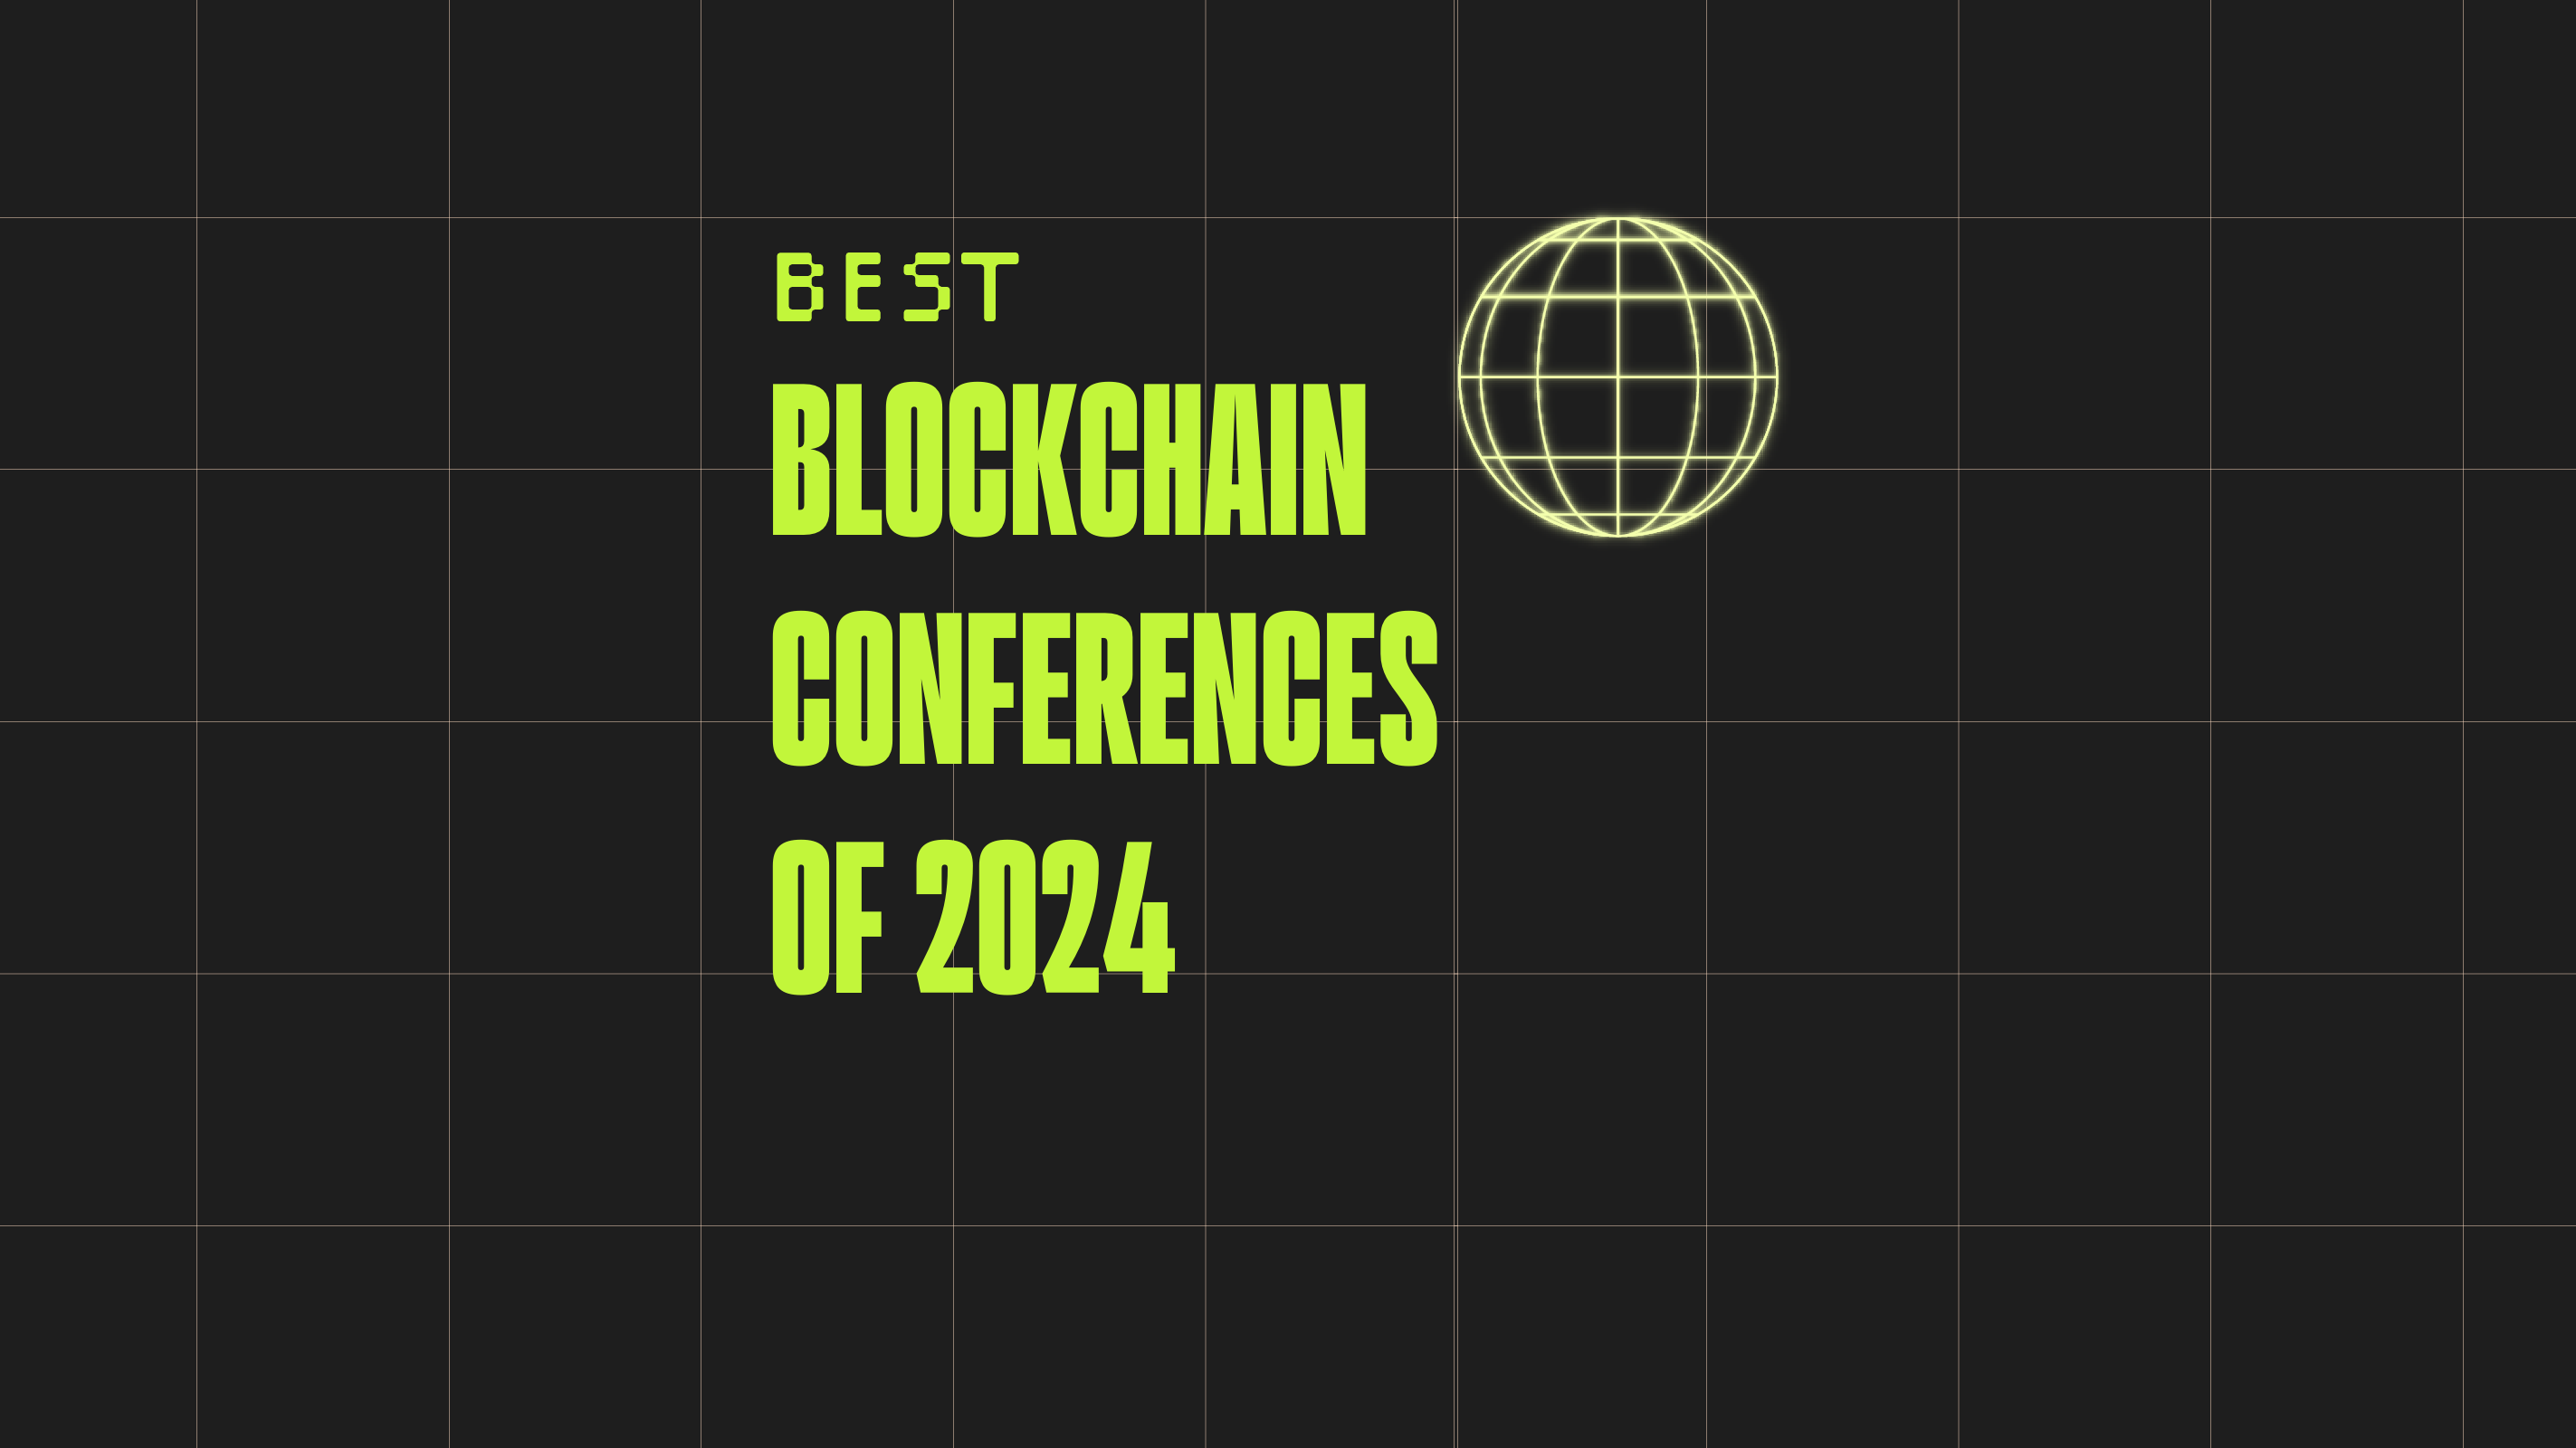 Blockchain conferences of 2024 best events